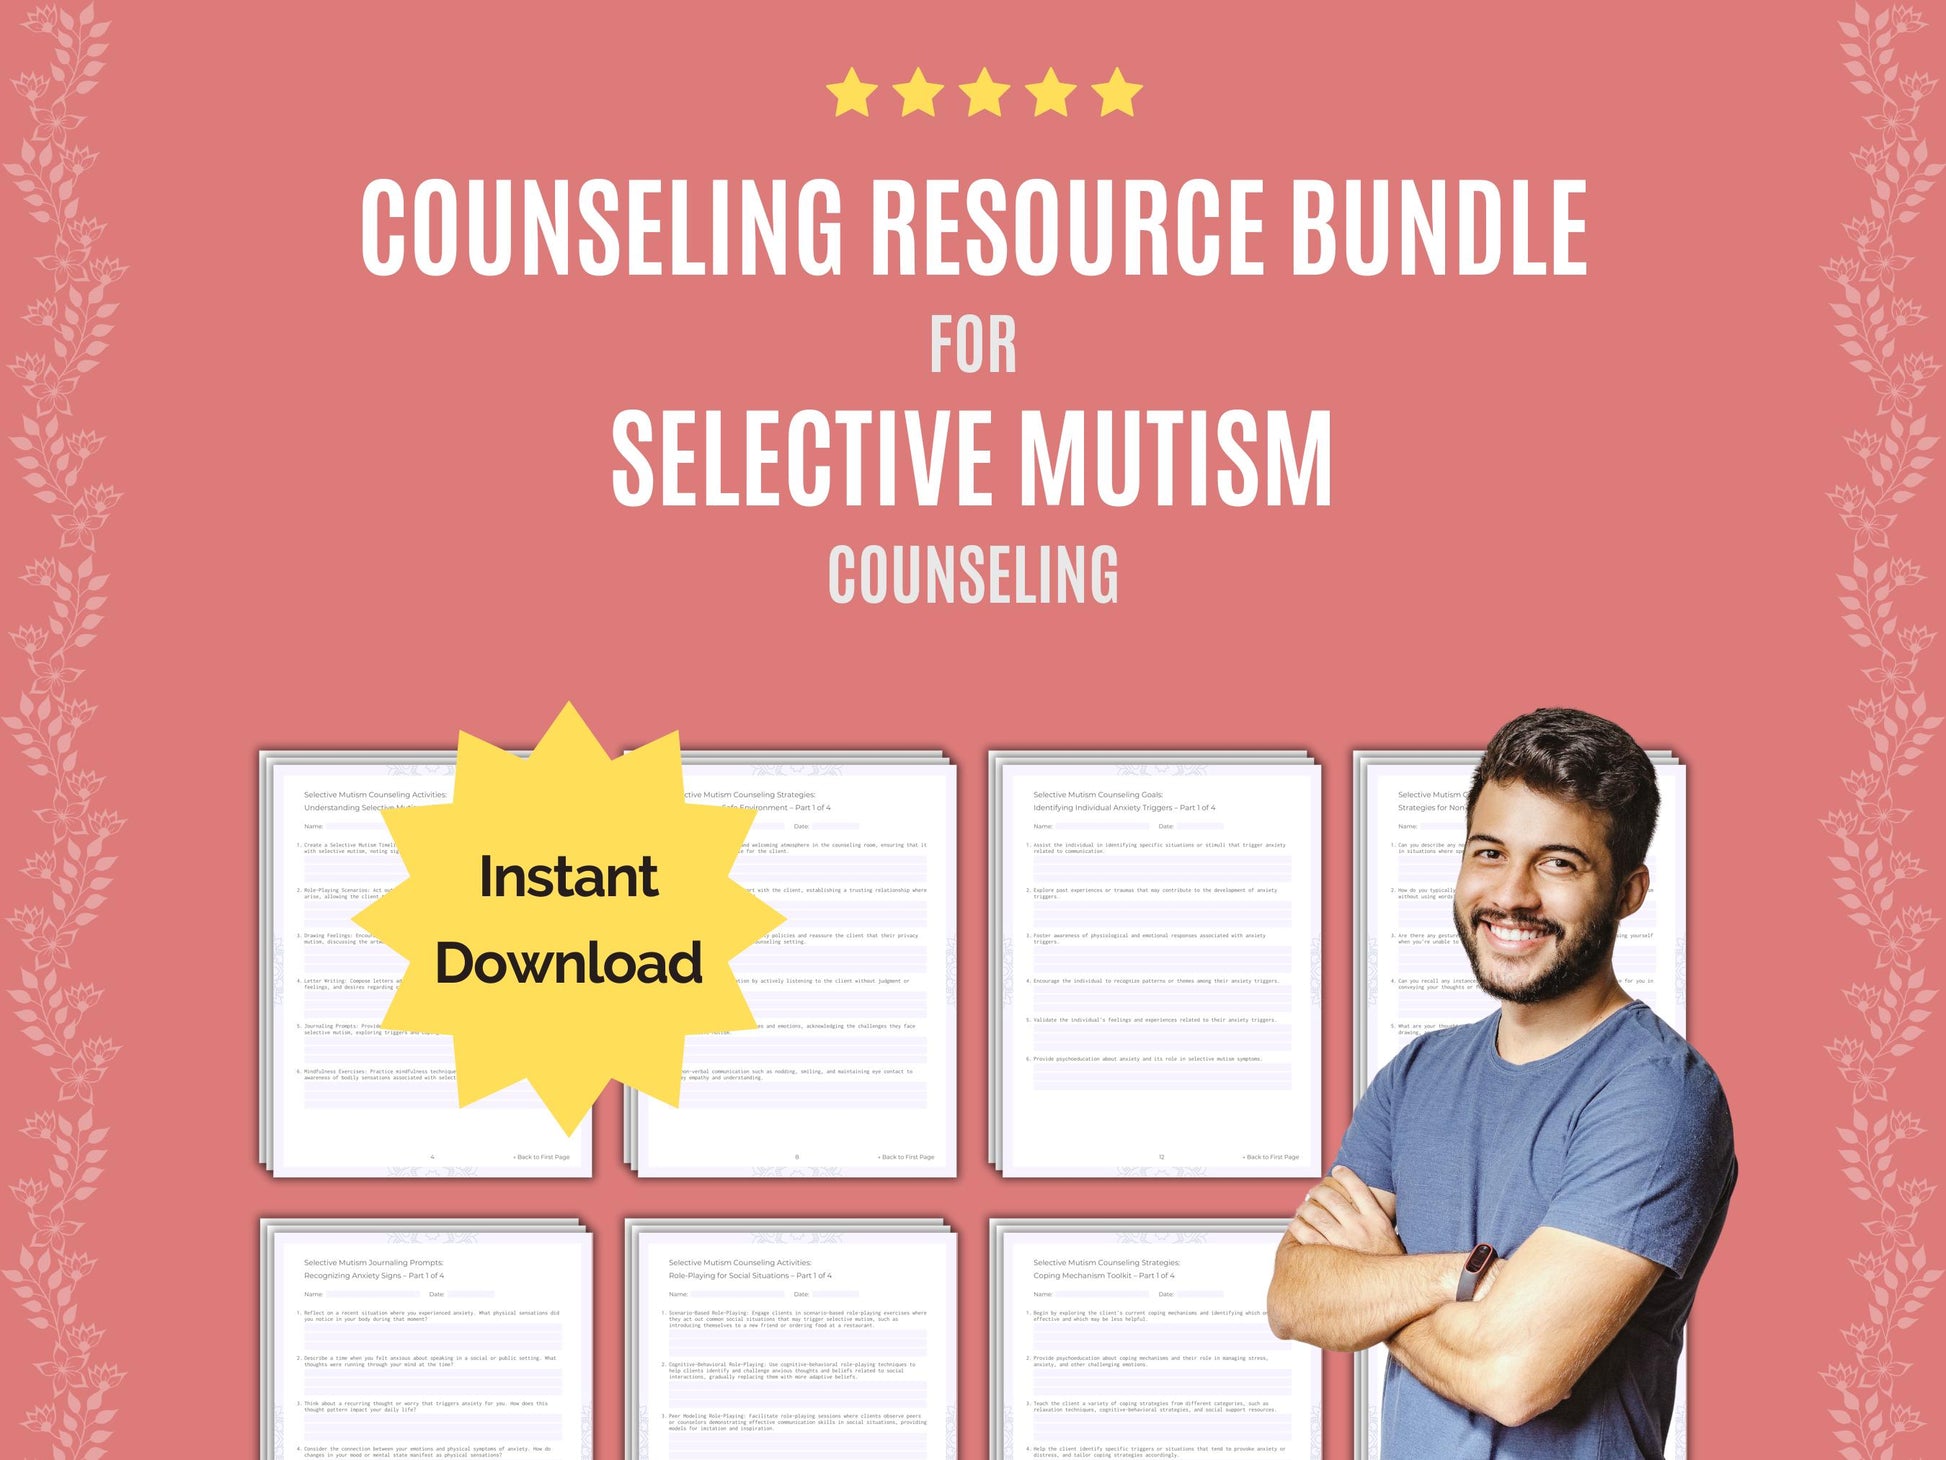 Mental Health, Selective Worksheet, Selective Idea, Mutism, Selective Tool, Selective Template, Selective Counseling, Therapist, Counselor, Selective Workbook, Selective Therapy, Selective Resource, Selective Bundle